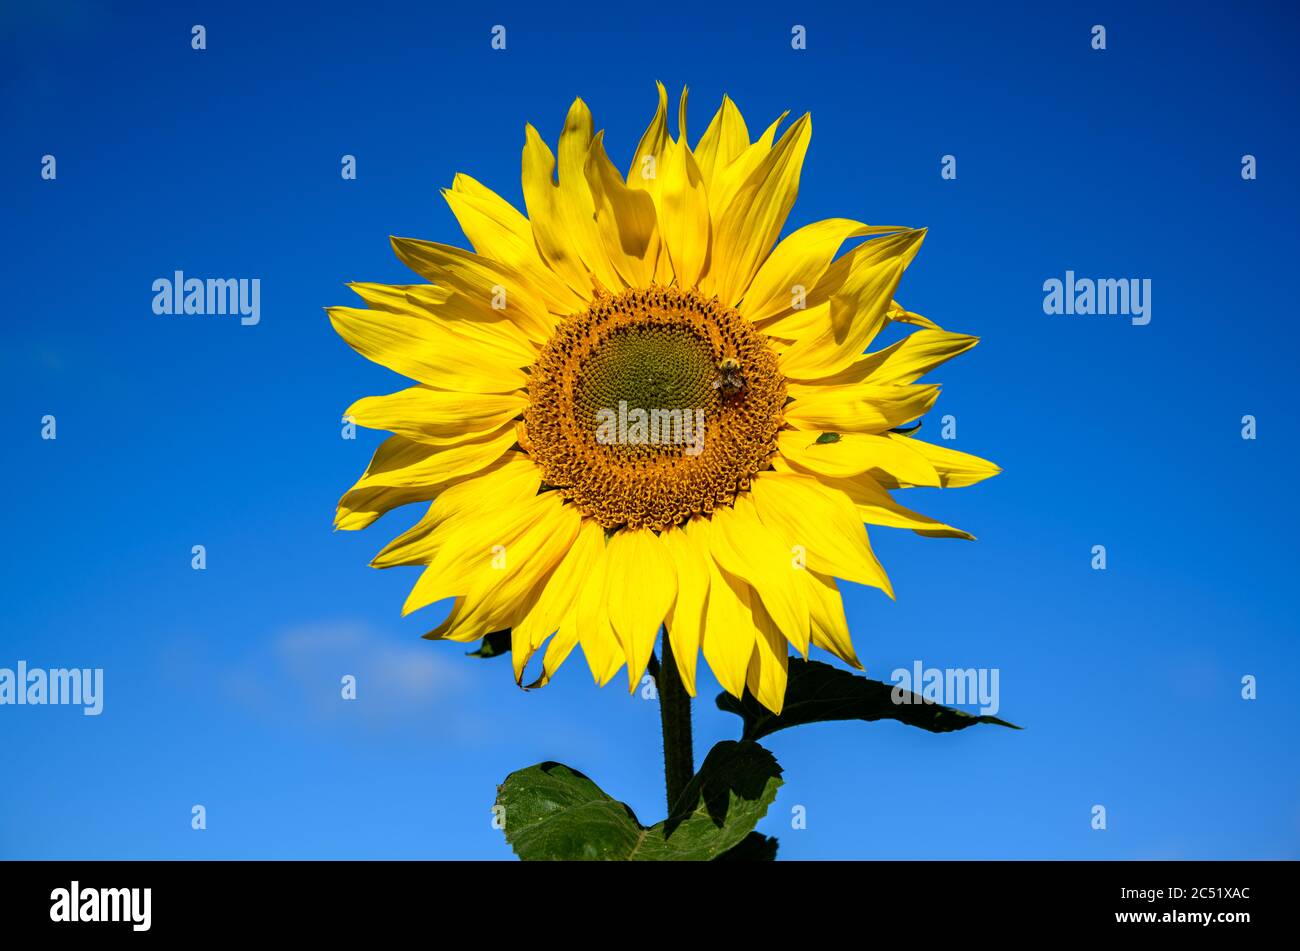 Sunflower against a bright blue sky with bumble bee and shield beetle Stock Photo